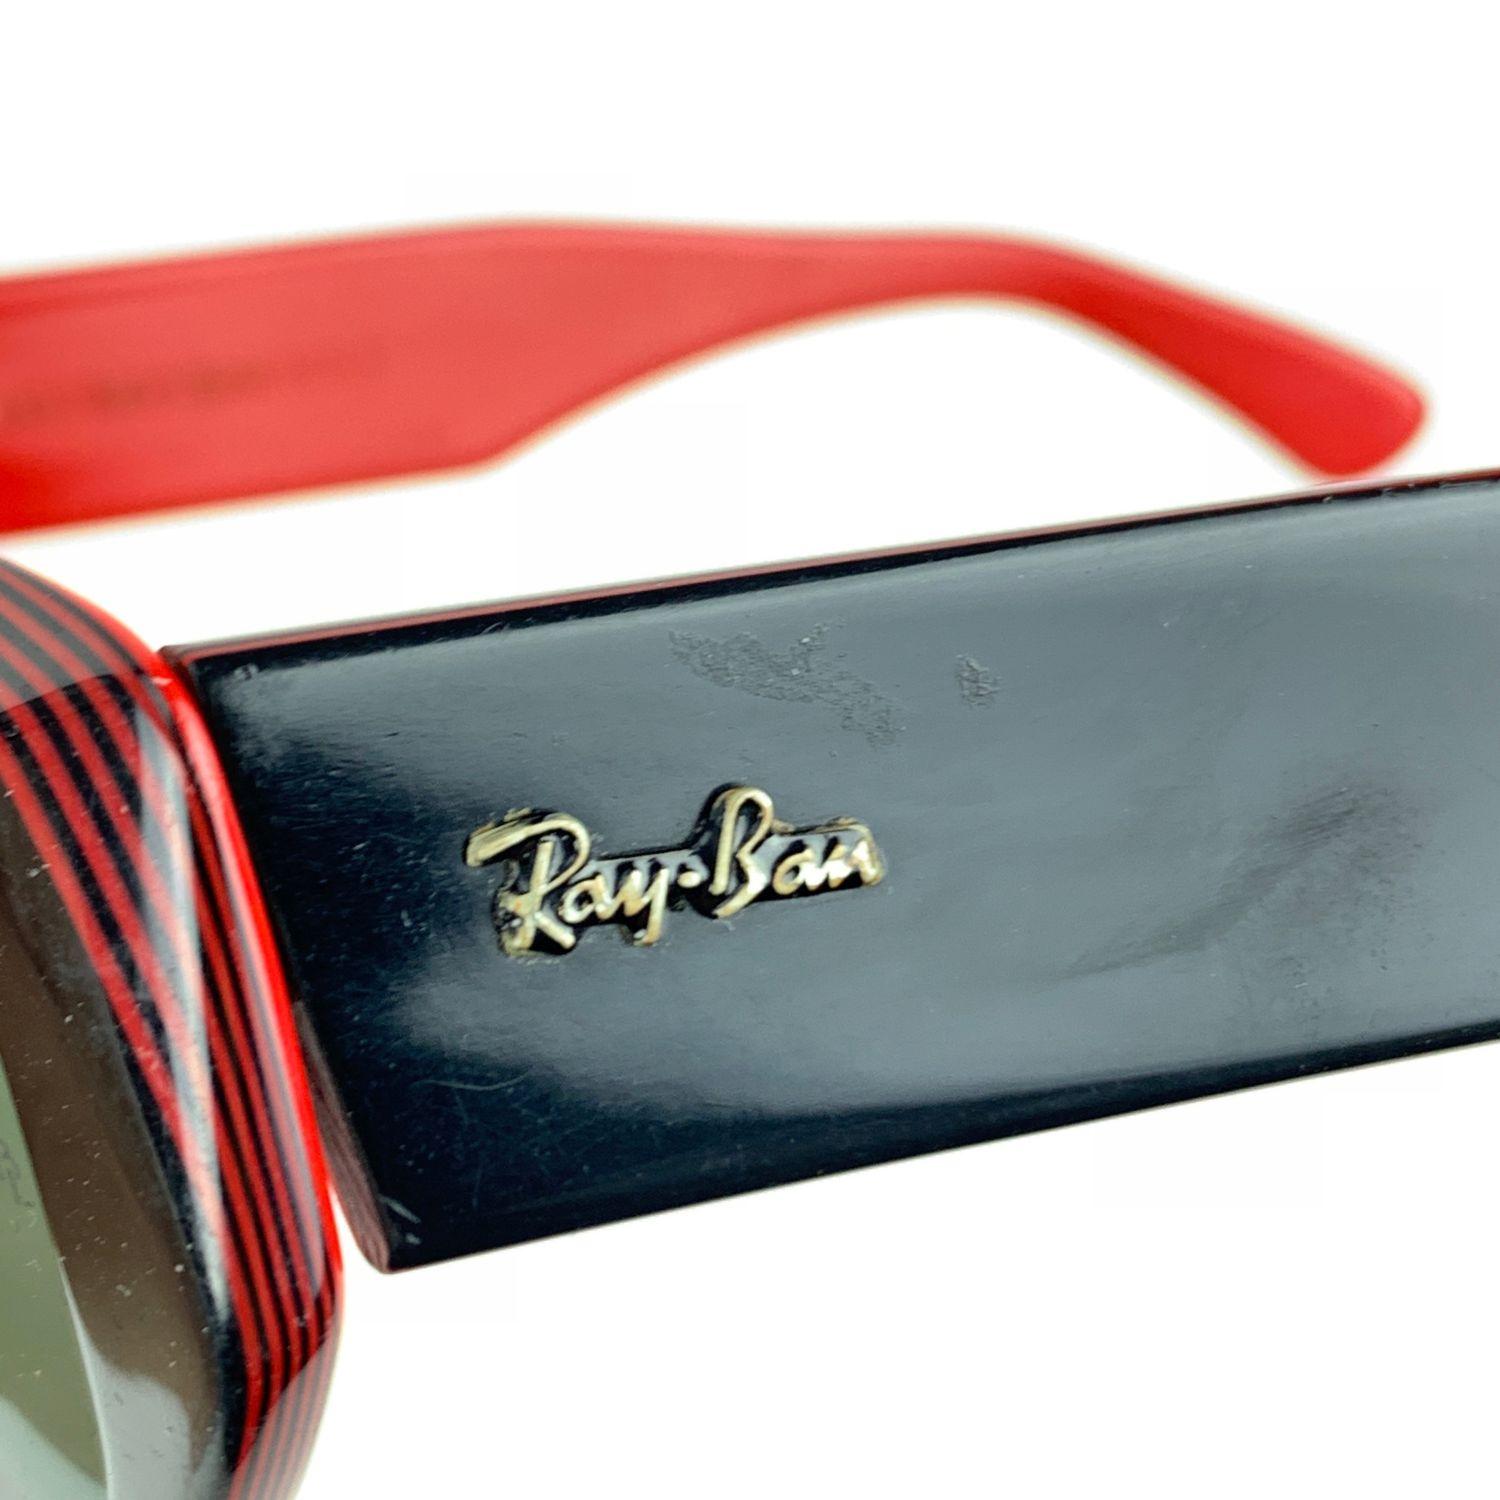 Vintage sunglasses by Ray-Ban Bausch & Lomb, mod. DEKKO. Black and red frame with thick ear stems. Ray-Ban logo on temples. Original 100% UV protection G-15 green lenses. BL - BAUSCH & LOMB logo etched on both lenses

Details

MATERIAL: